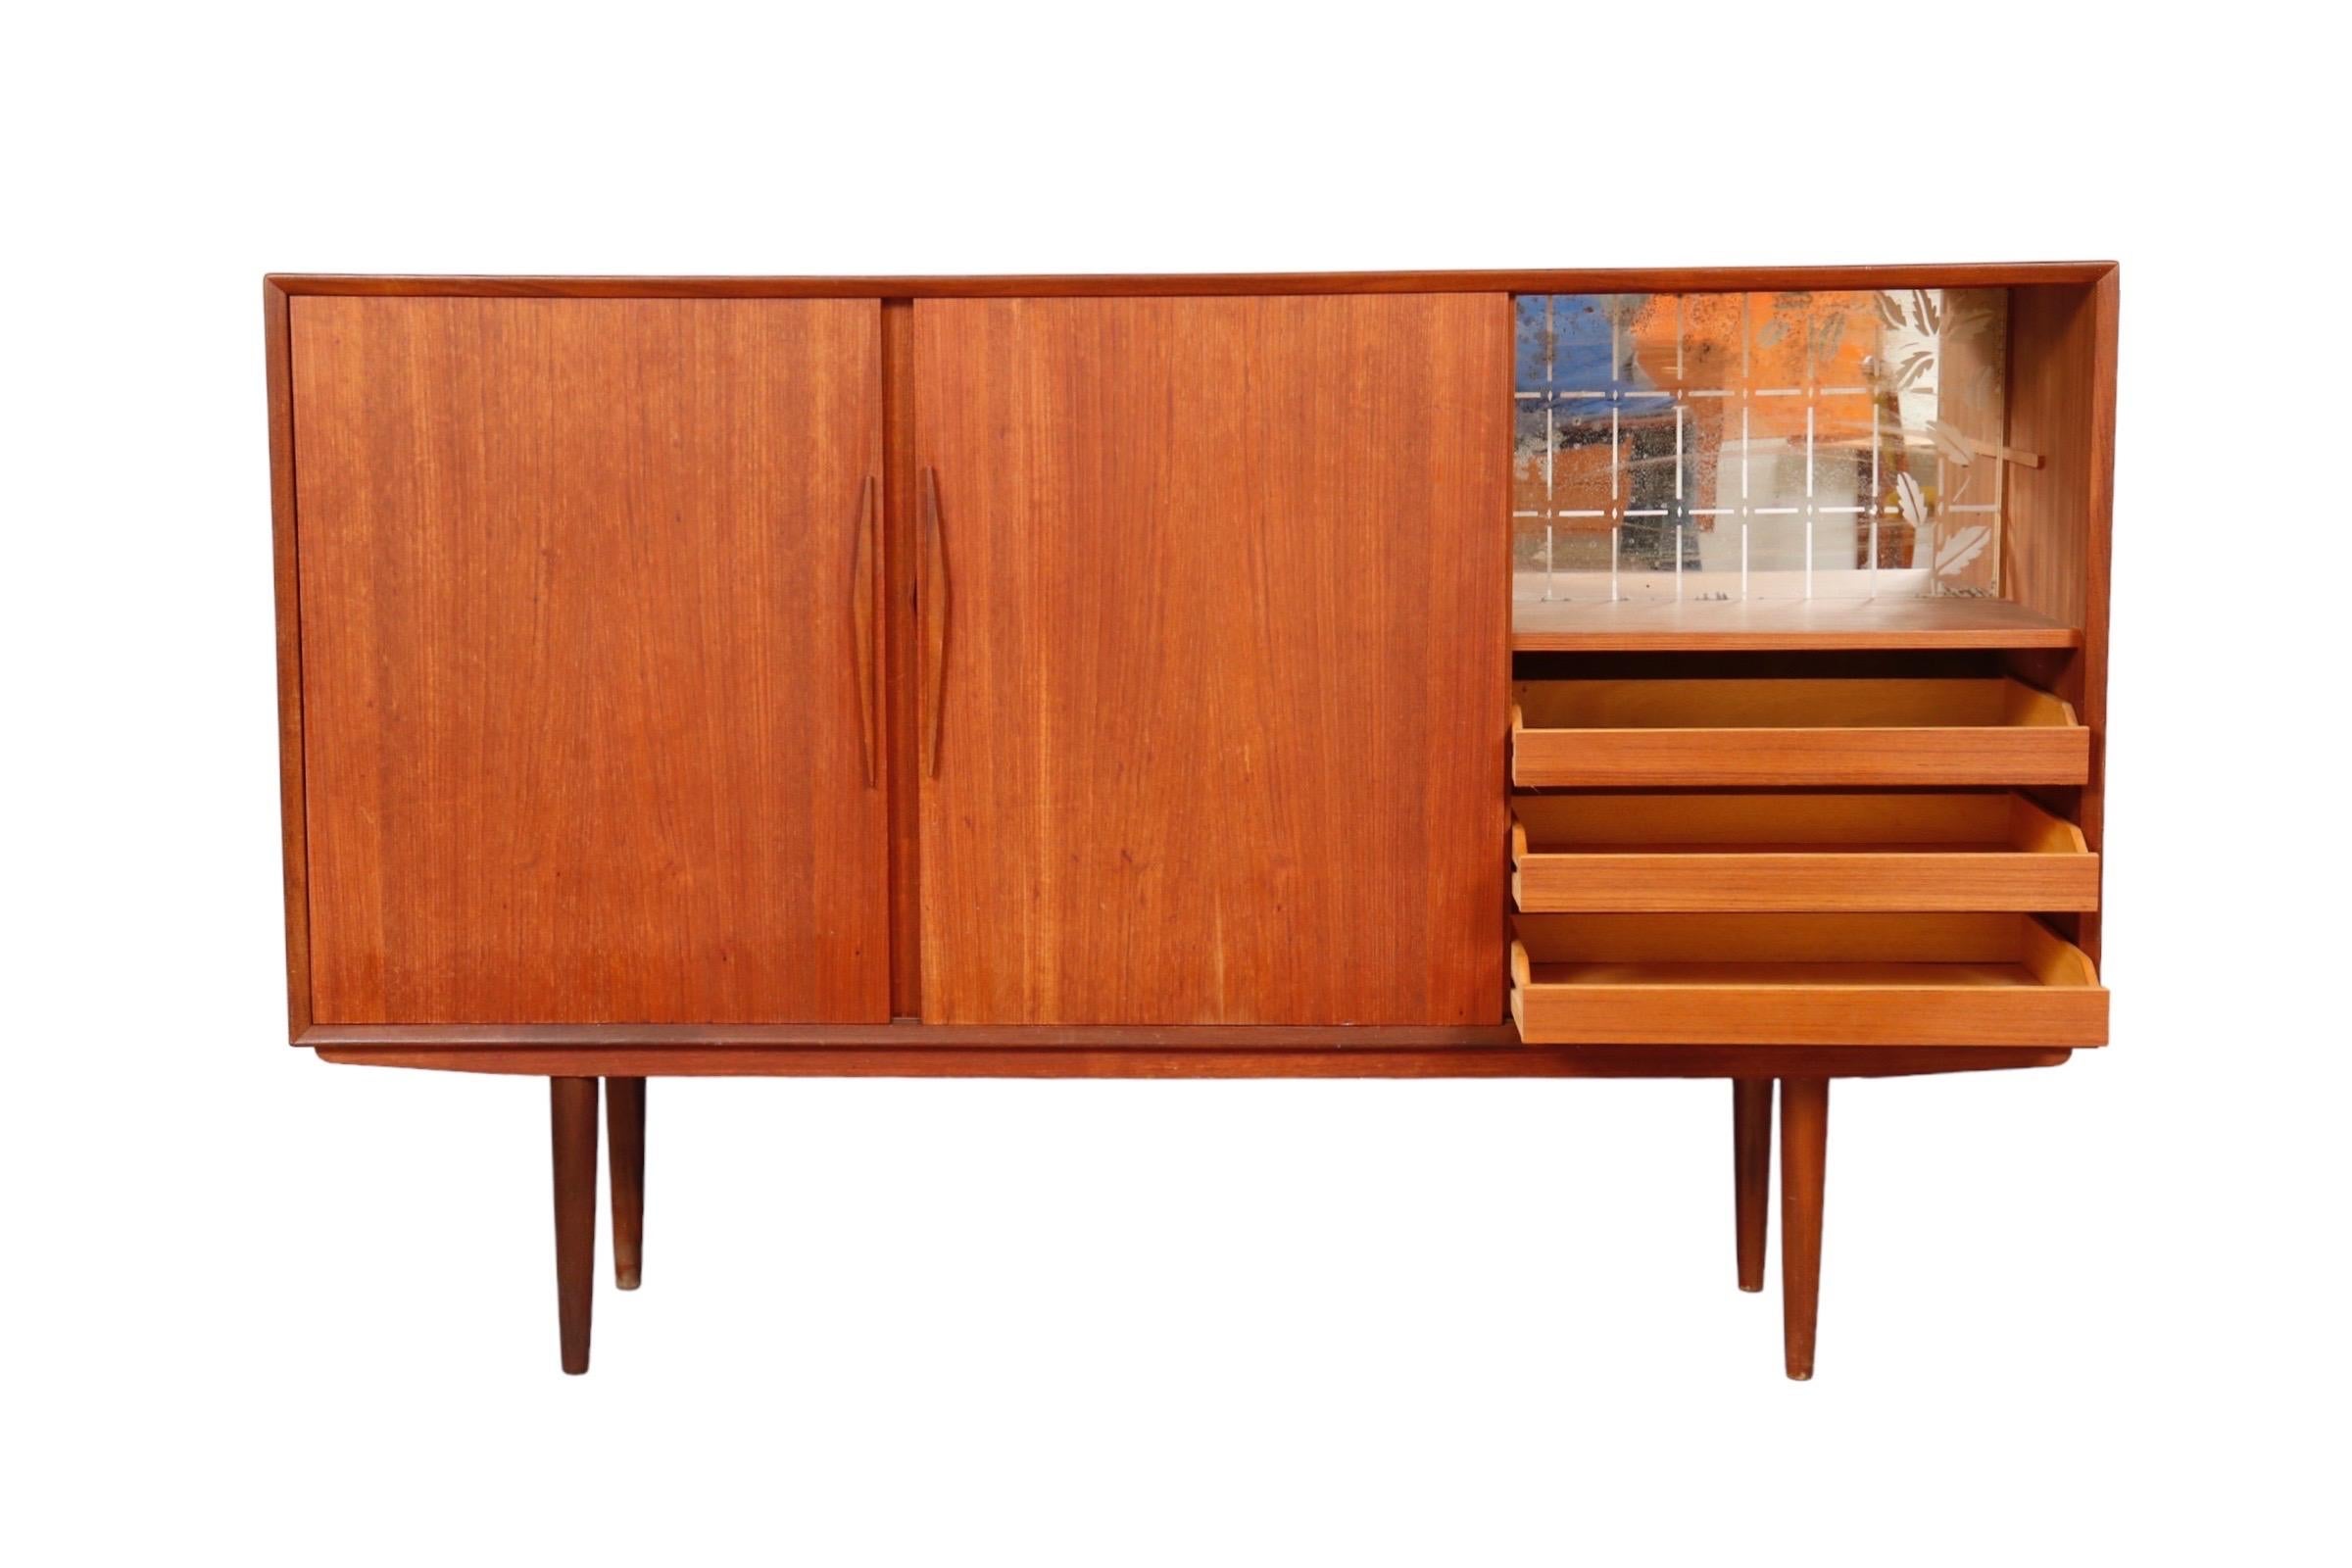 A Danish mid century bar buffet in teak. Three sliding doors reveal storage shelves left and center, and a mini bar area and three drawers to the right.